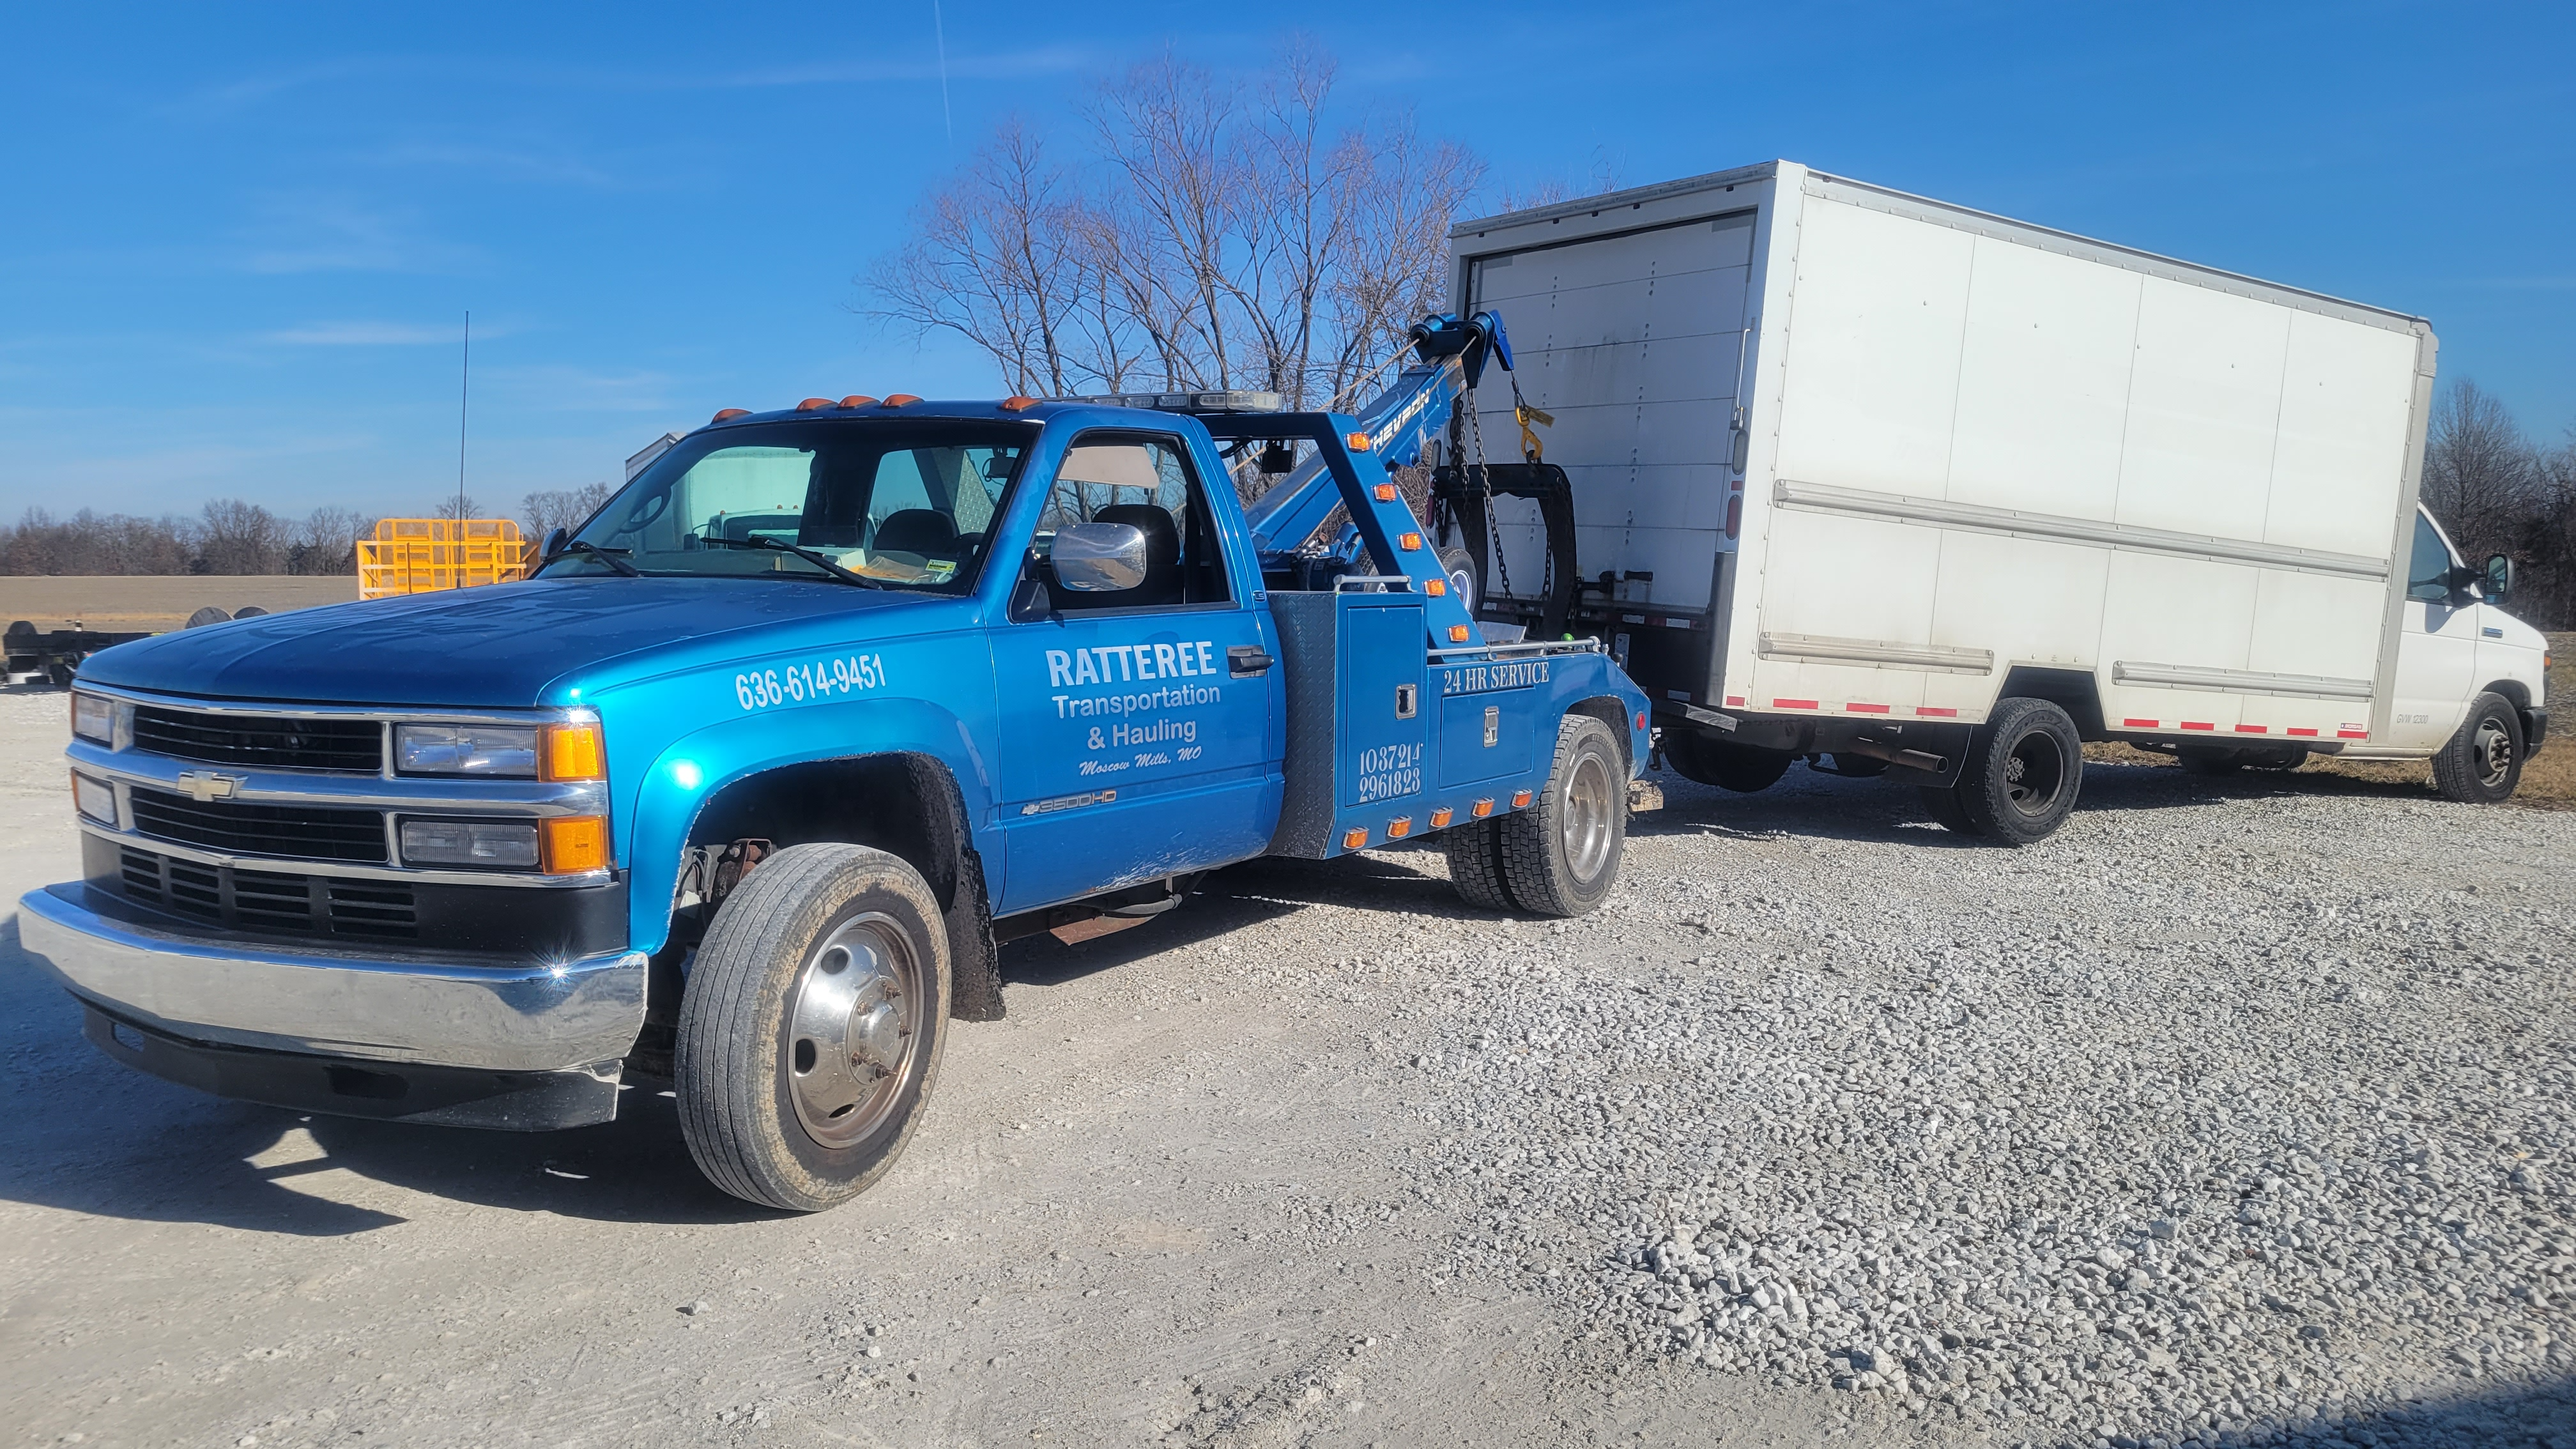 Ratteree Towing Transportation & Hauling Towing.com Profile Banner